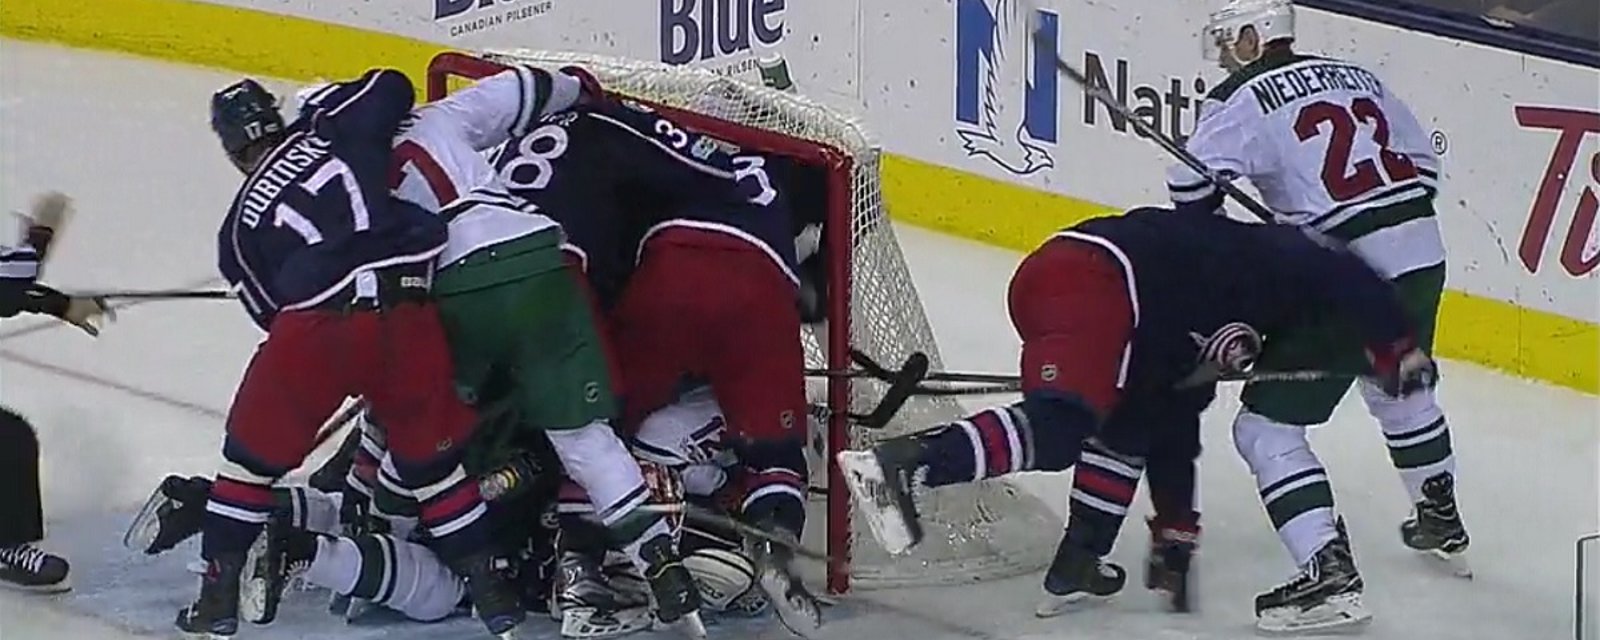 Must see: Eric Staal thrown into the opposing net and punched in the back of the head 3 times.